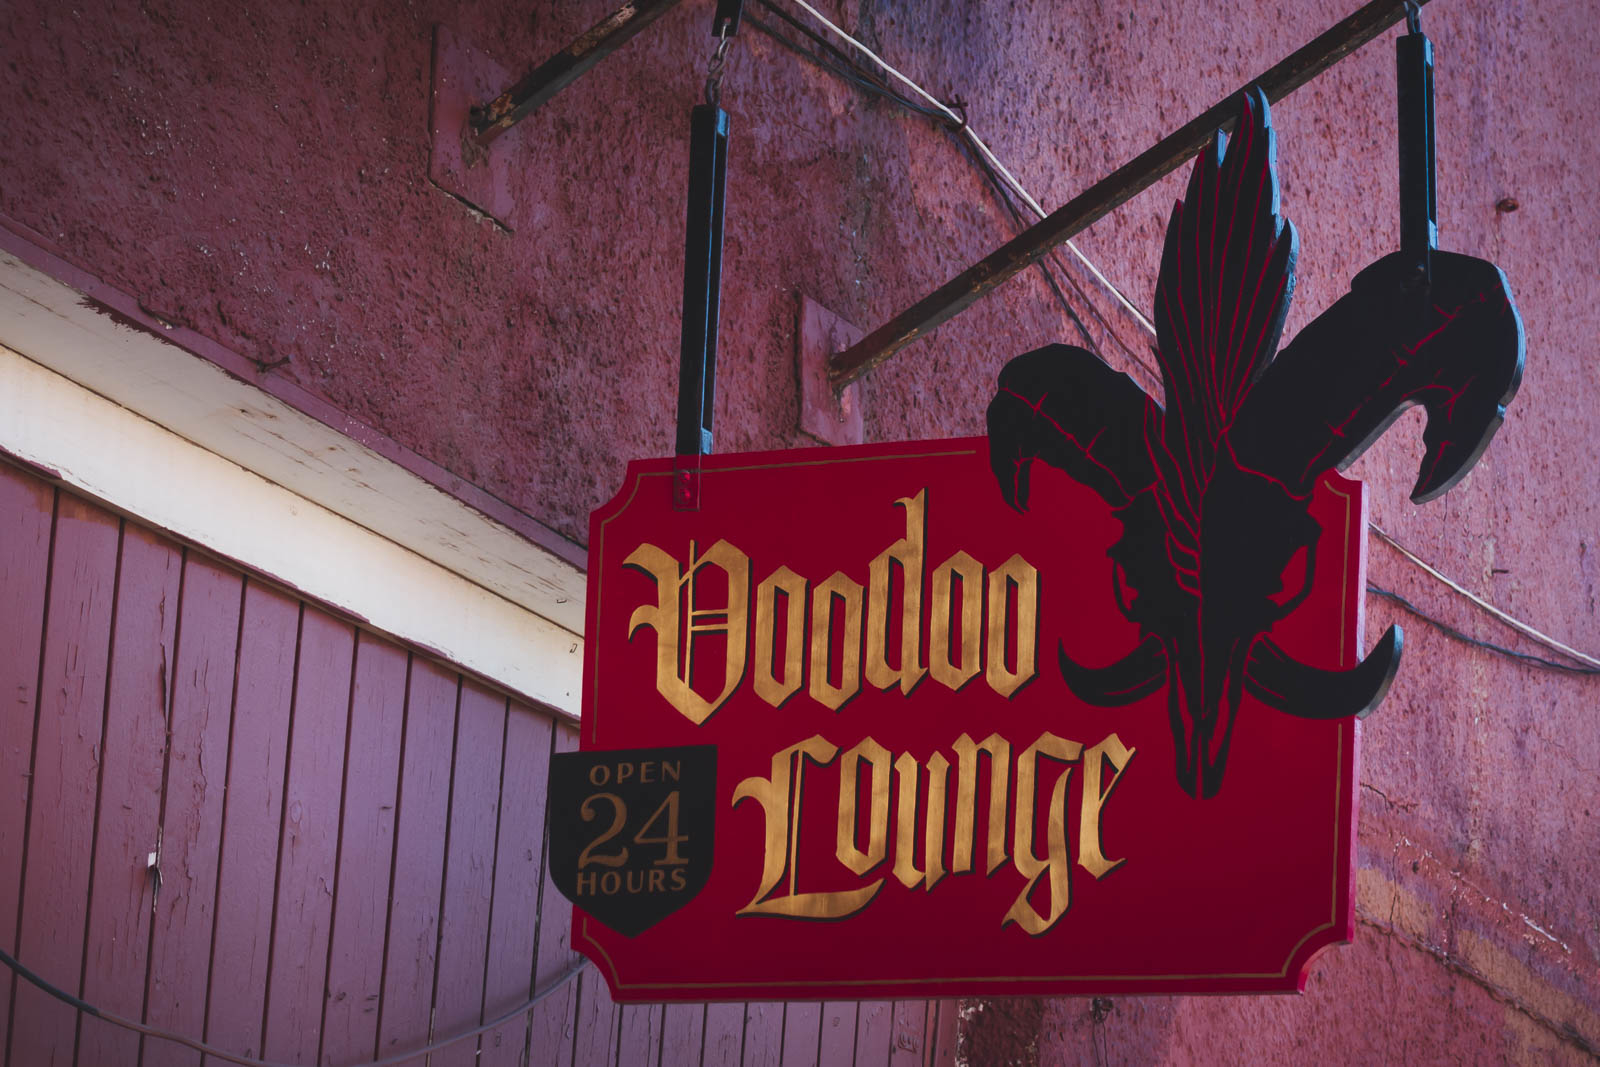 places to visit in new orleans - voodoo lounge